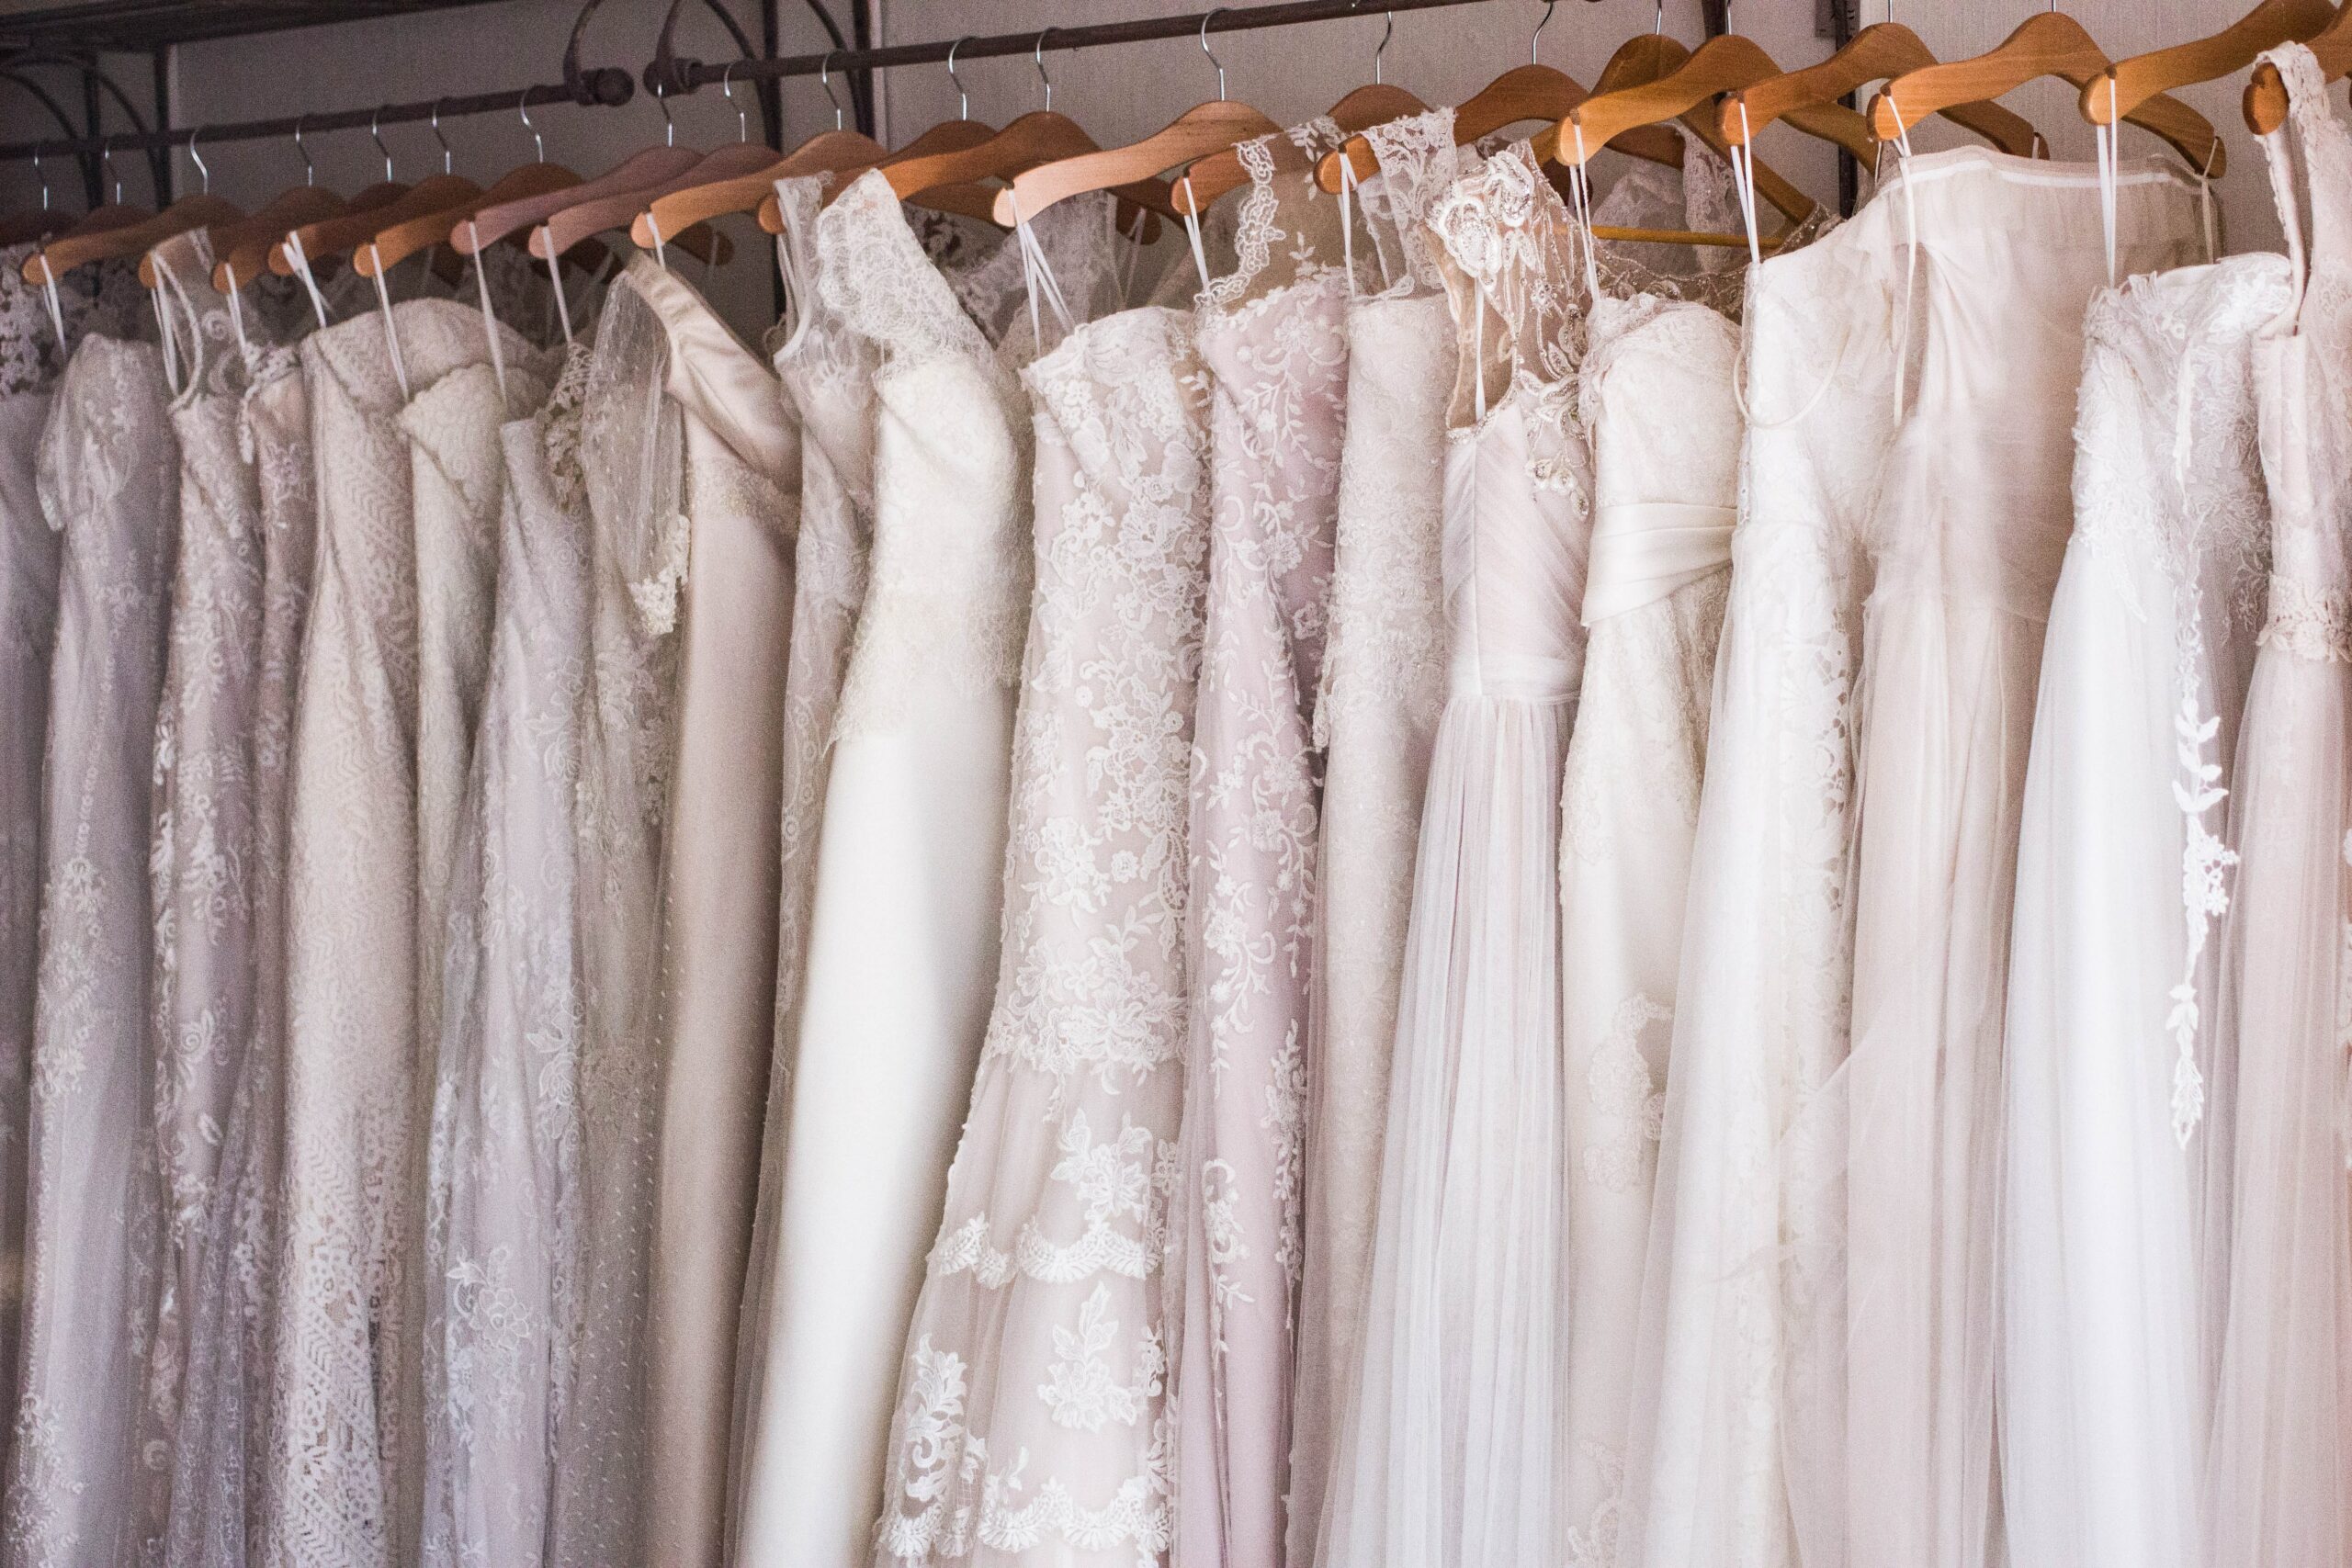 2023 Wedding Dress Dry Cleaning & Preservation Cost - Fash